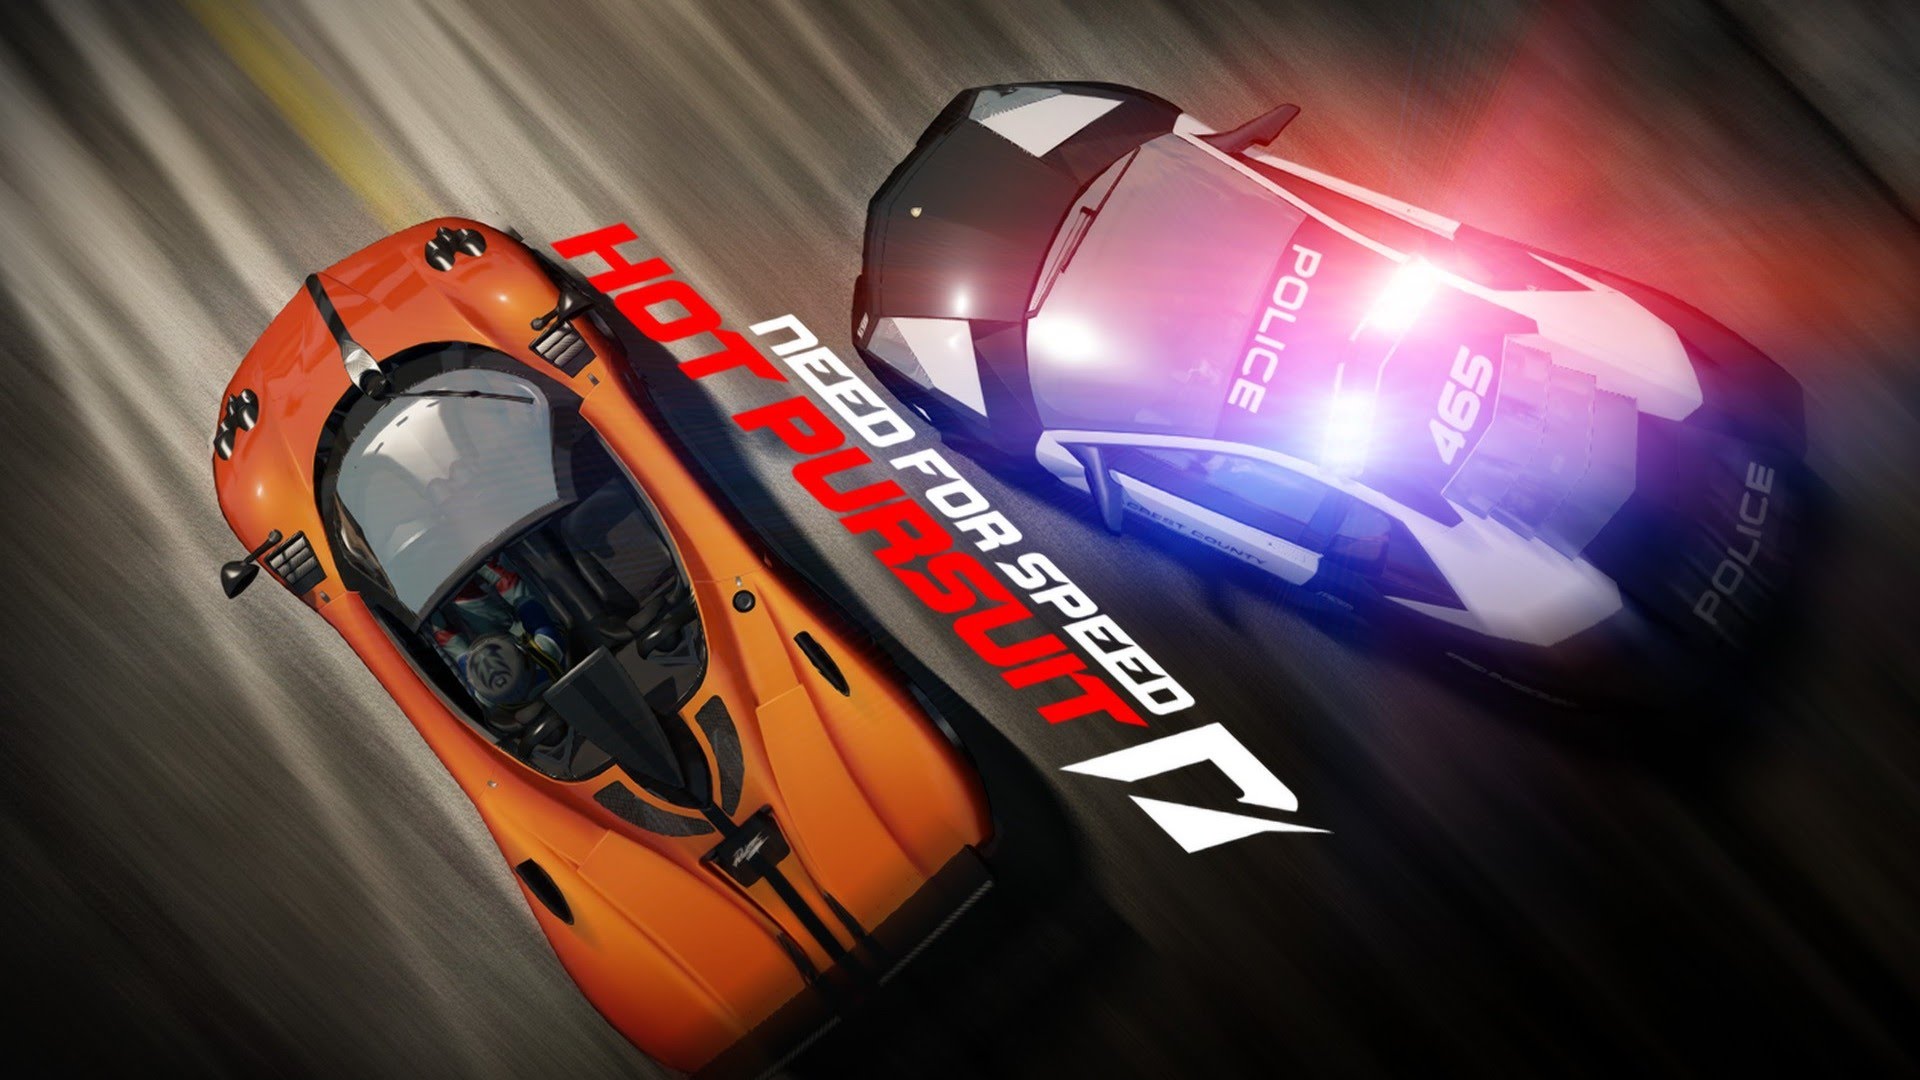 NEED FOR SPEED – HOT PURSUIT